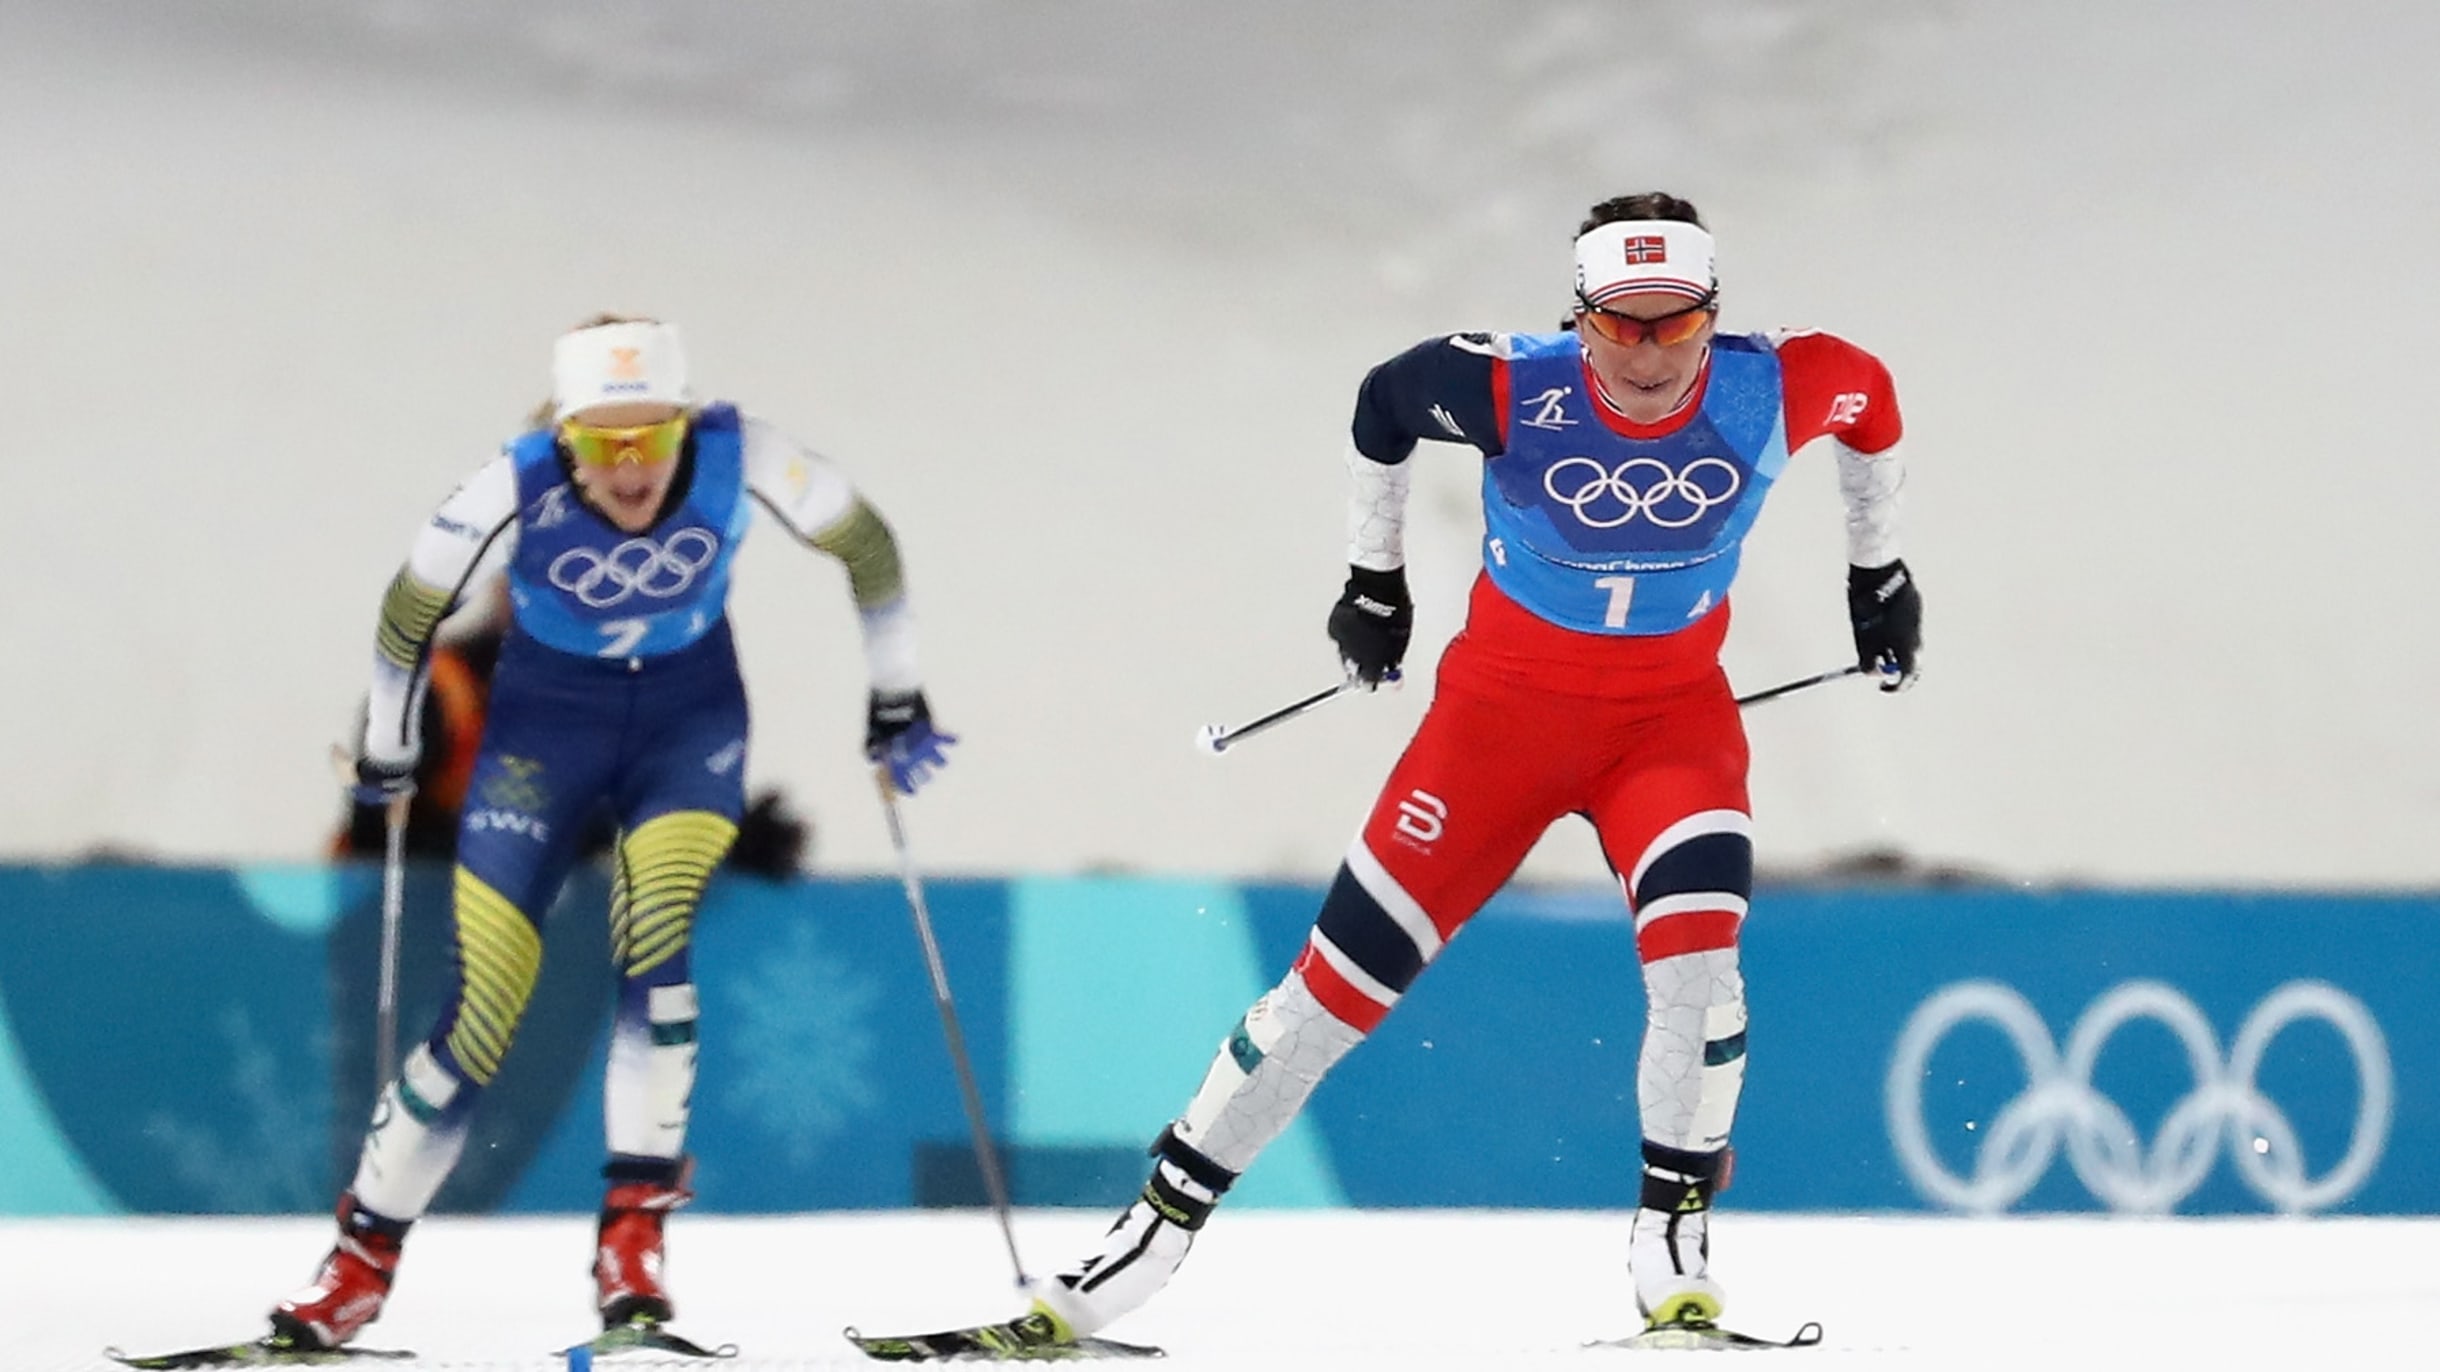 How to watch cross-country skiing at the Olympic Winter Games Beijing 2022